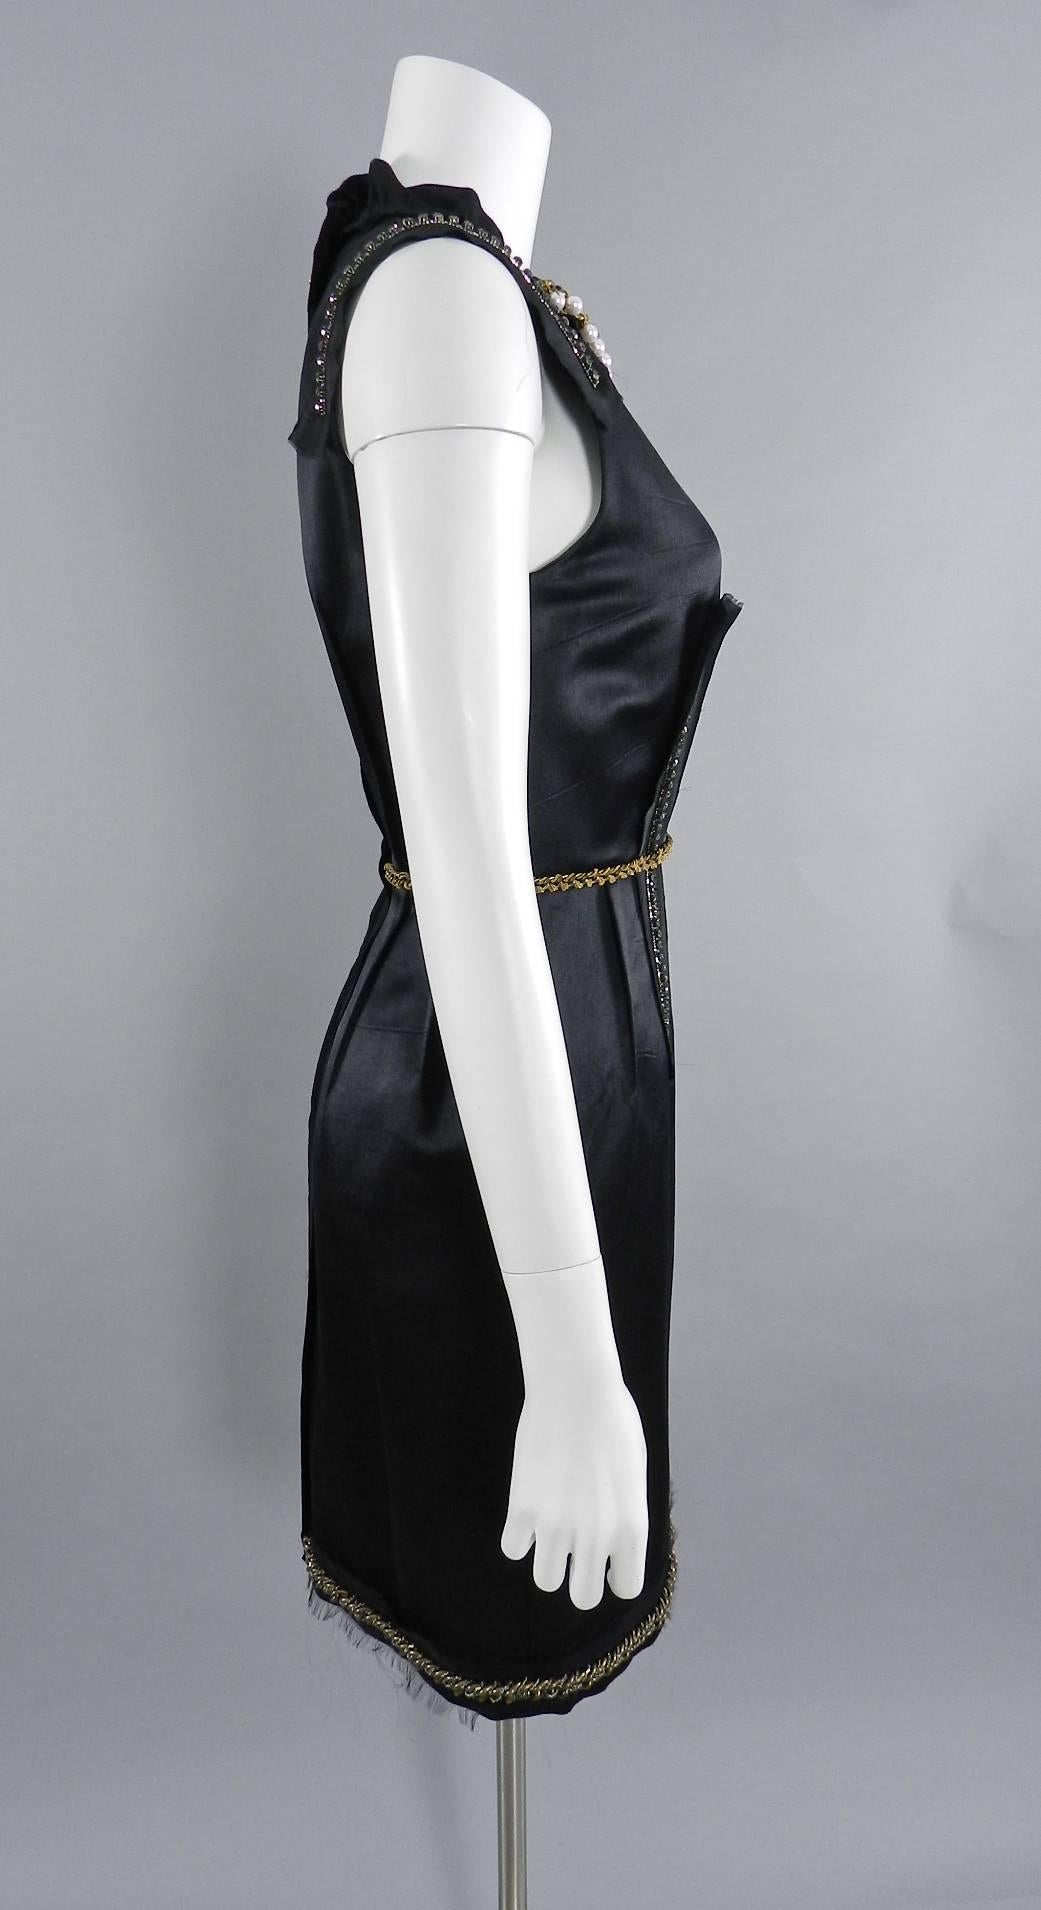 Lanvin Black Satin Cocktail Dress with Pearls and Chains.  2012 Anniversary Dix Ans label to commemorate designer Alber Albez' 10 years at Lanvin. Embellished with antiqued goldtone chains, pearls, and rhinestones. Excellent pre-owned condition.